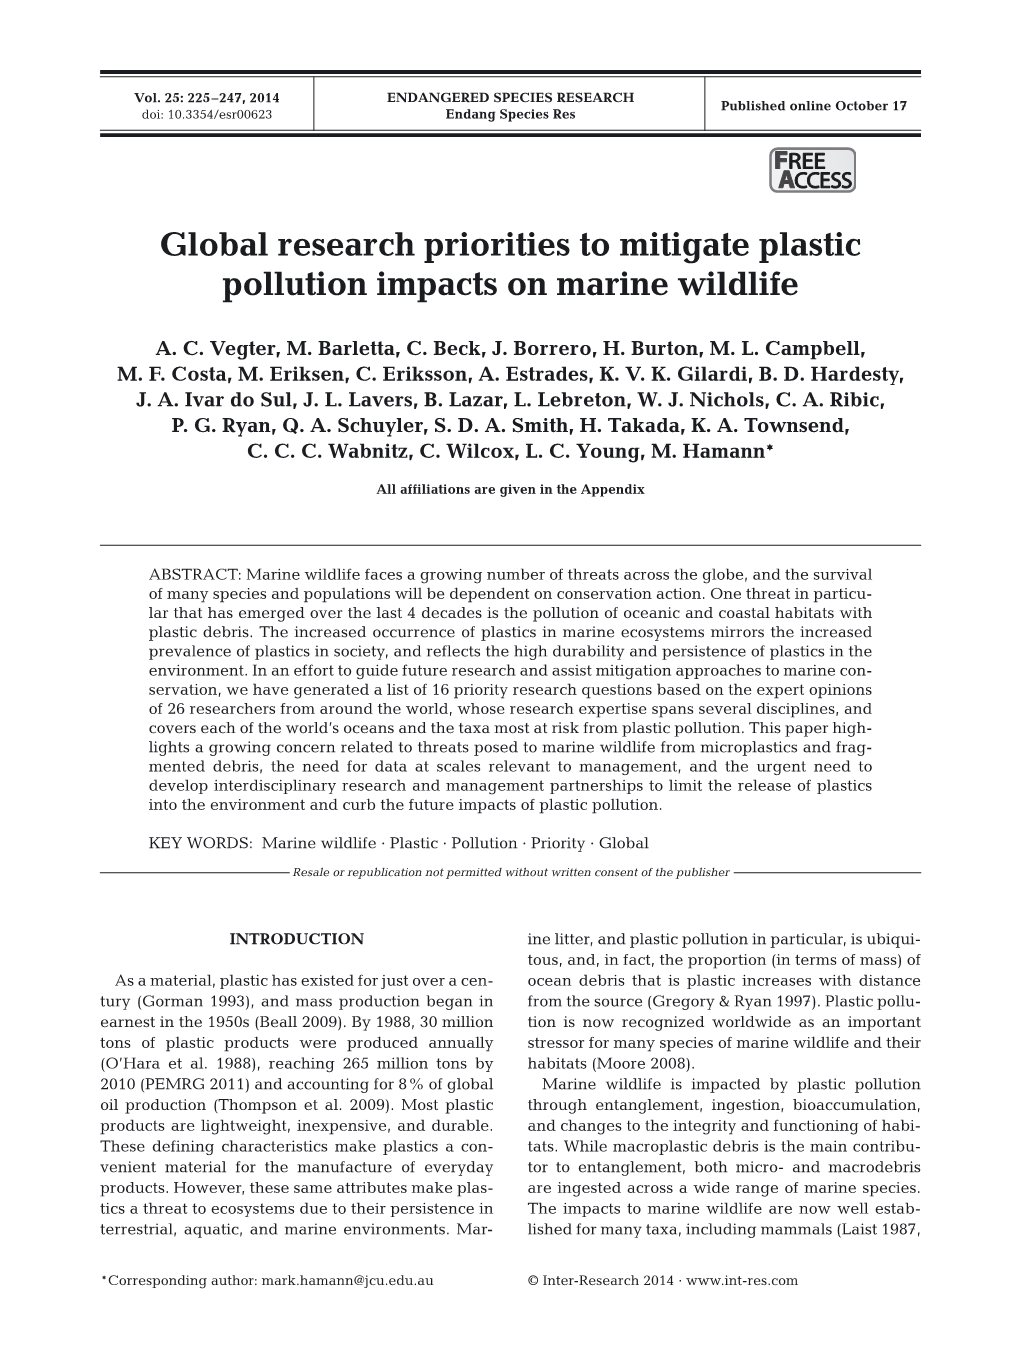 Global Research Priorities to Mitigate Plastic Pollution Impacts on Marine Wildlife